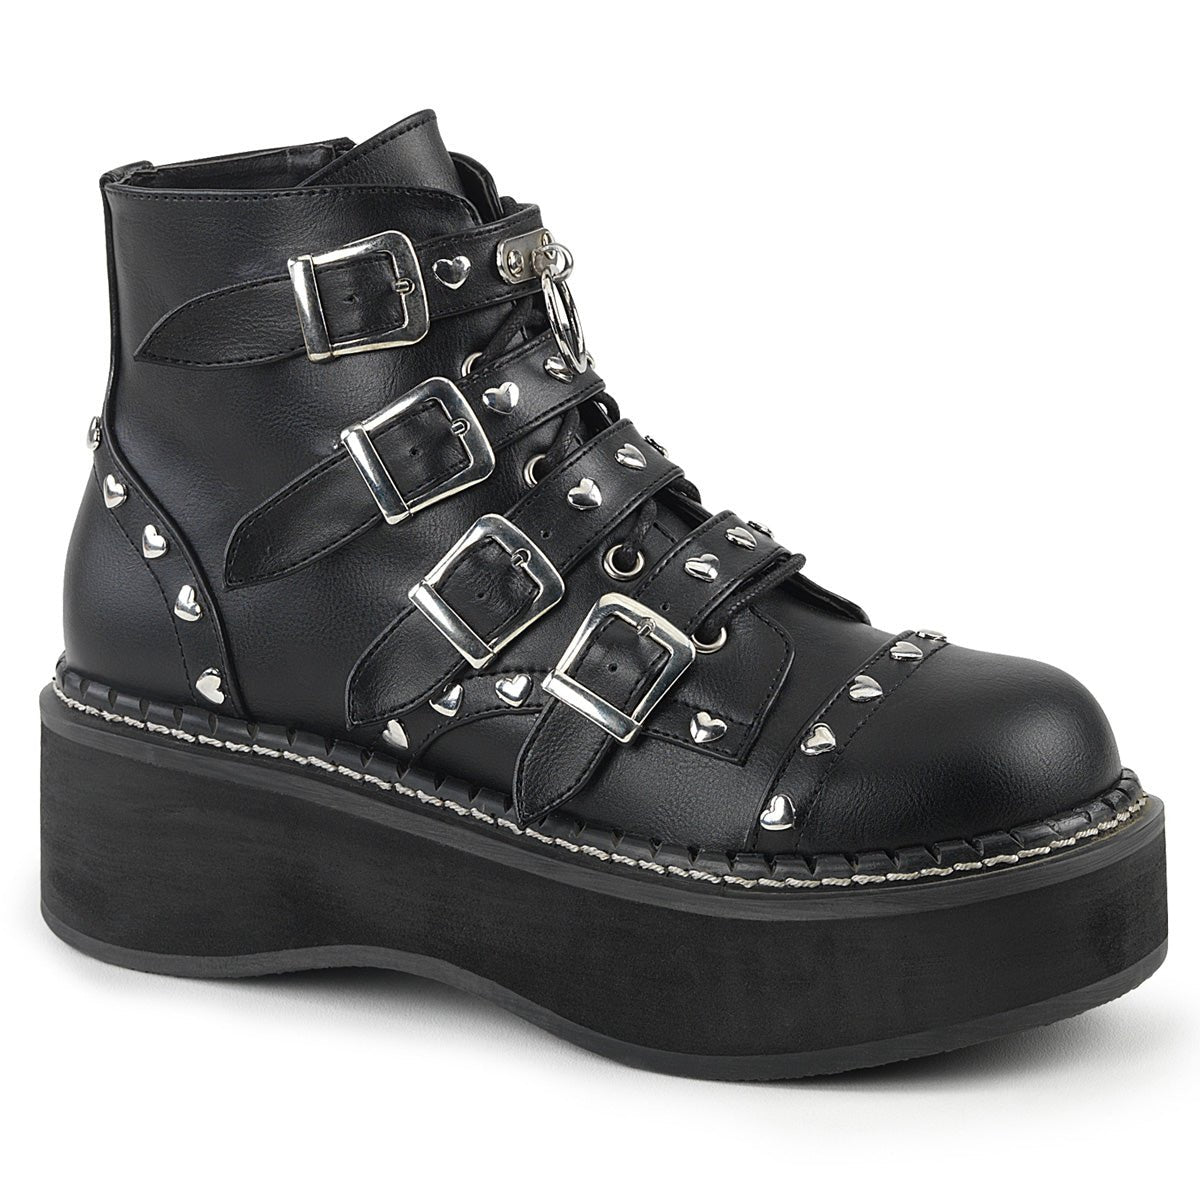 Too Fast | Demonia Emily 315 | Black Vegan Leather Women's Ankle Boots